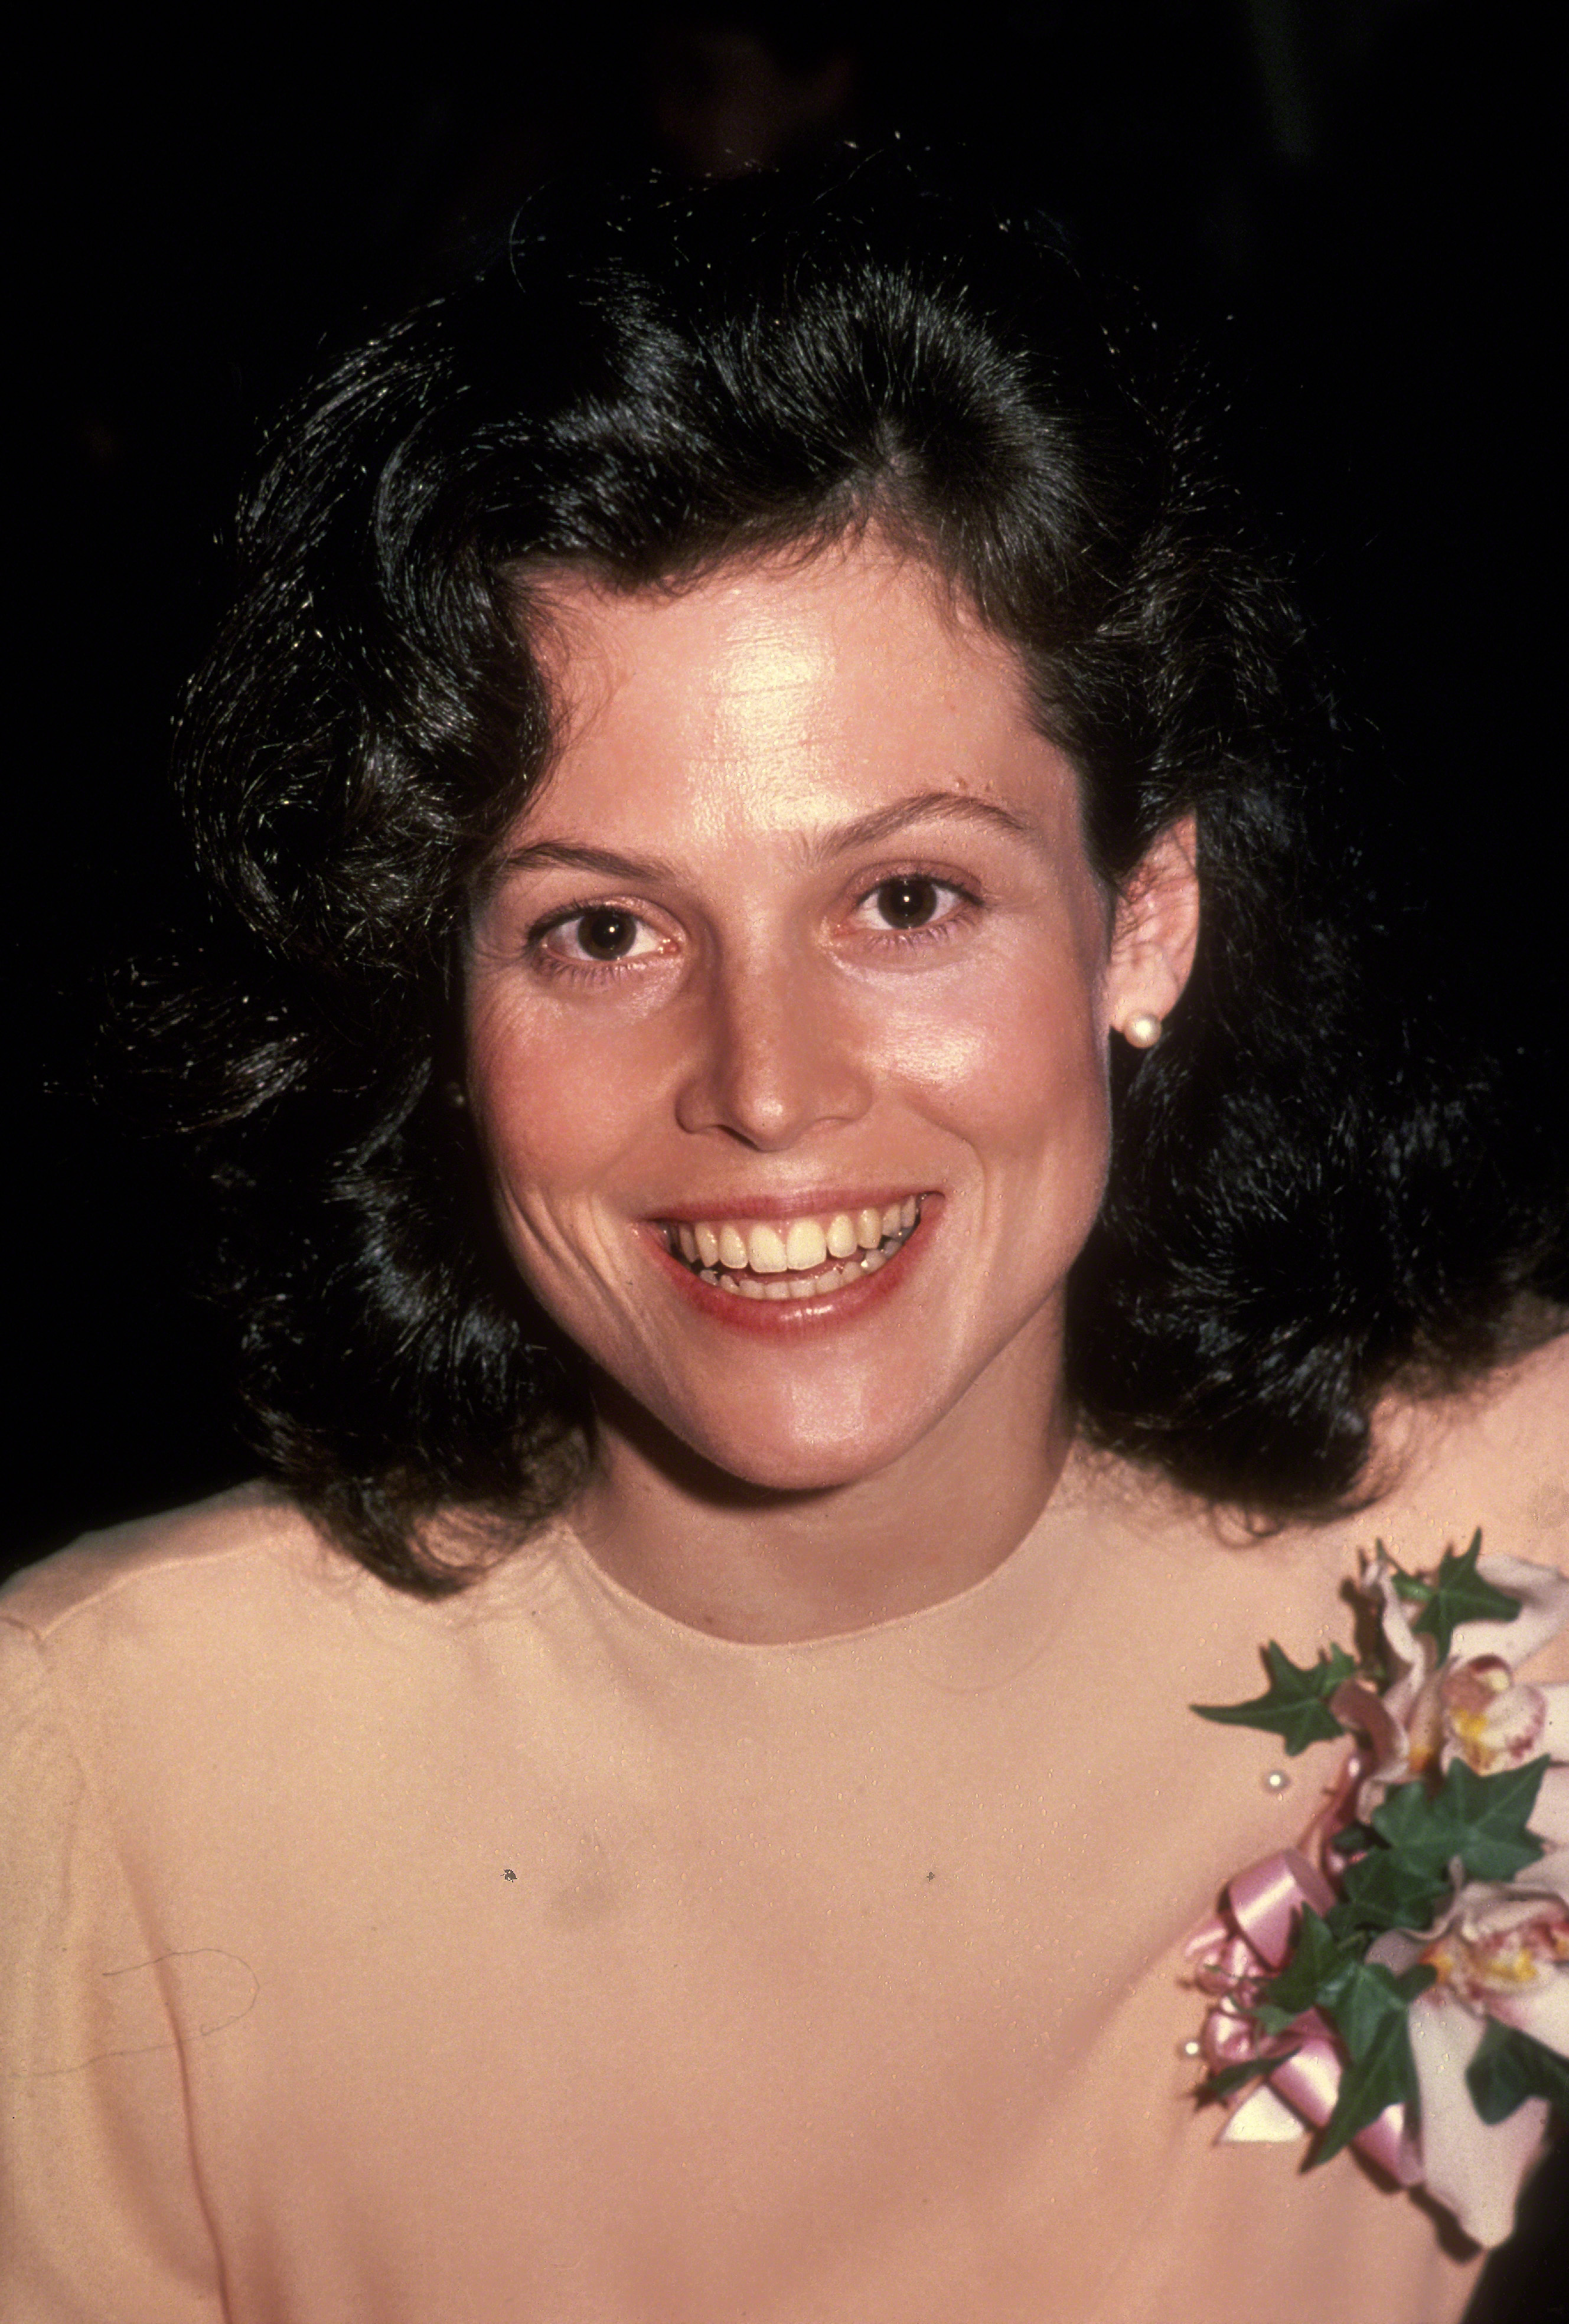 Sigourney Weaver pictured on January 1, 1980, in New York City. | Source: Getty Images